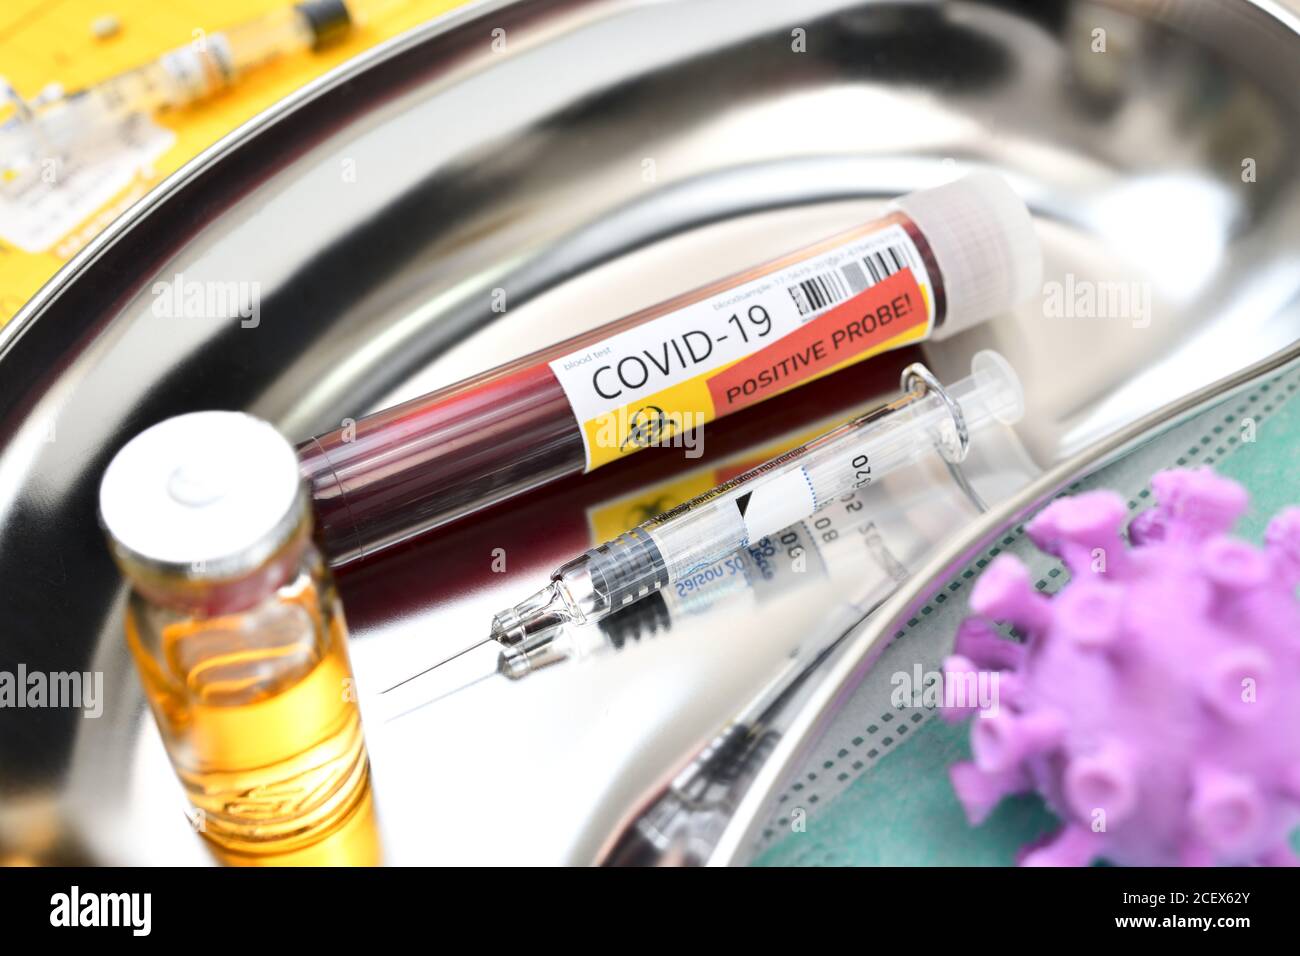 COVID-19 blood collection tube and syringe in a kidney dish, corona vaccination Stock Photo